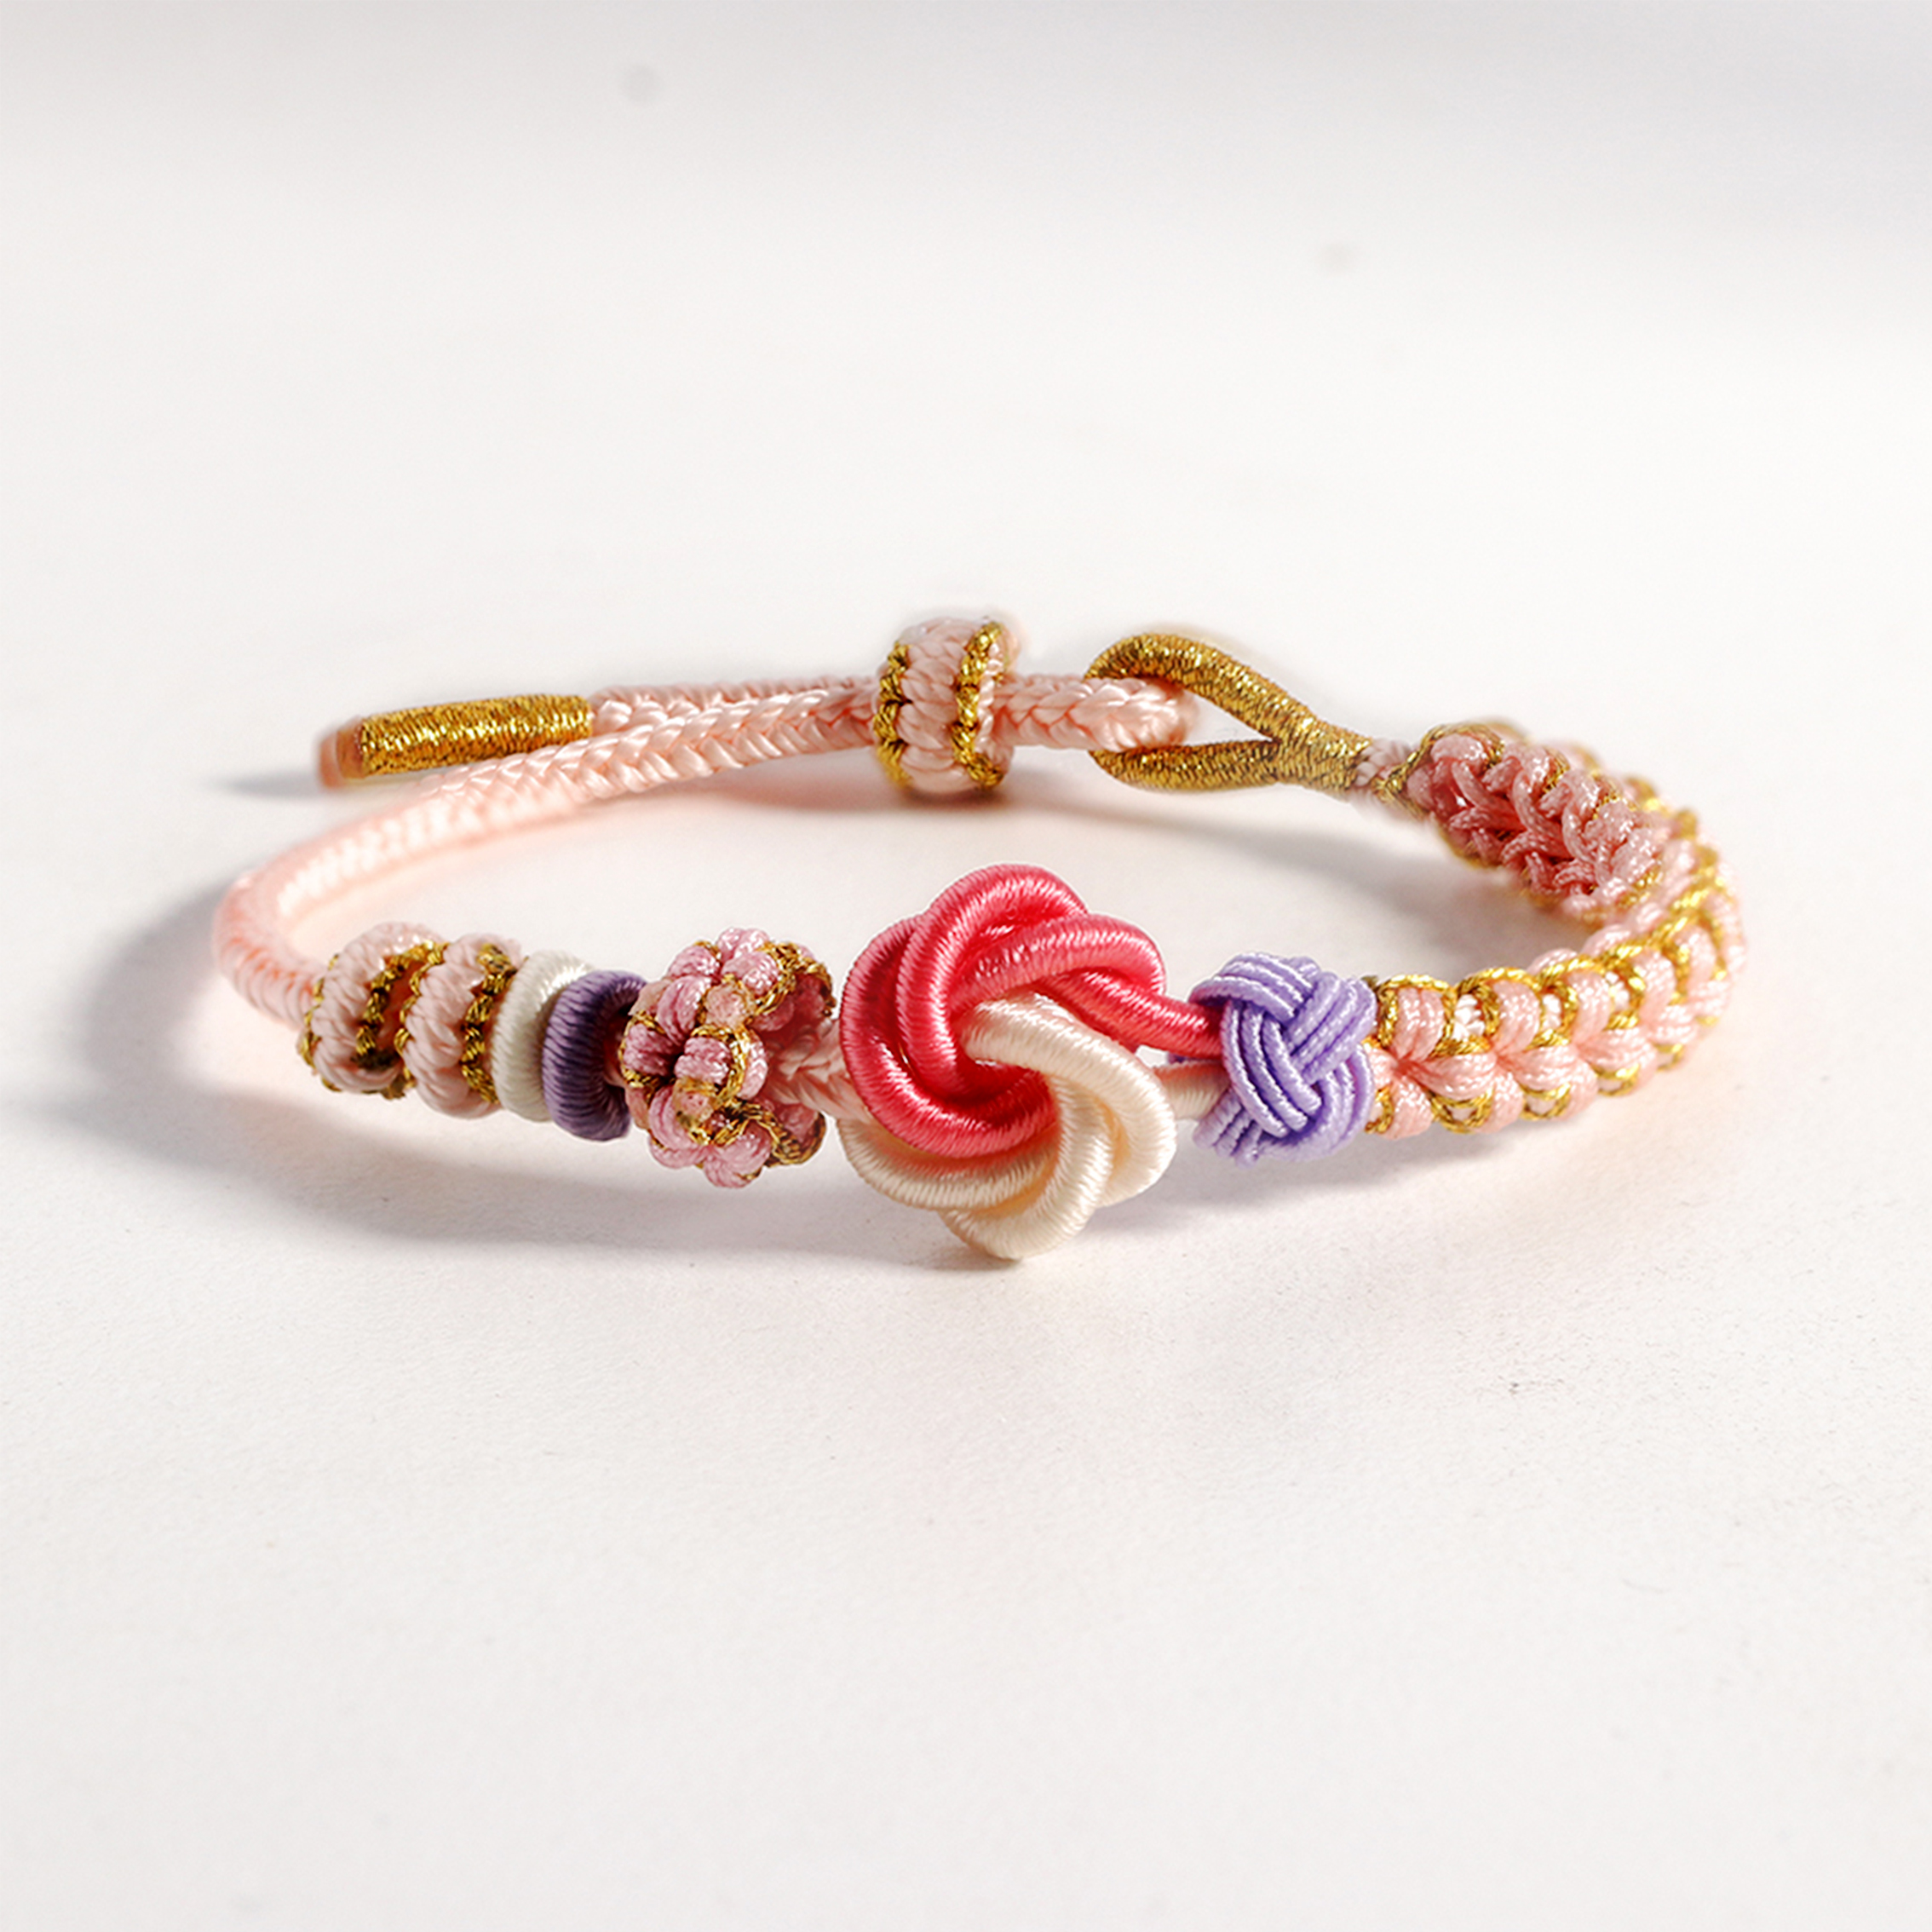 For Granddaughter - A LINK BETWEEN US THAT CAN NEVER BE UNDONE Peach Blossom Knot Bracelet